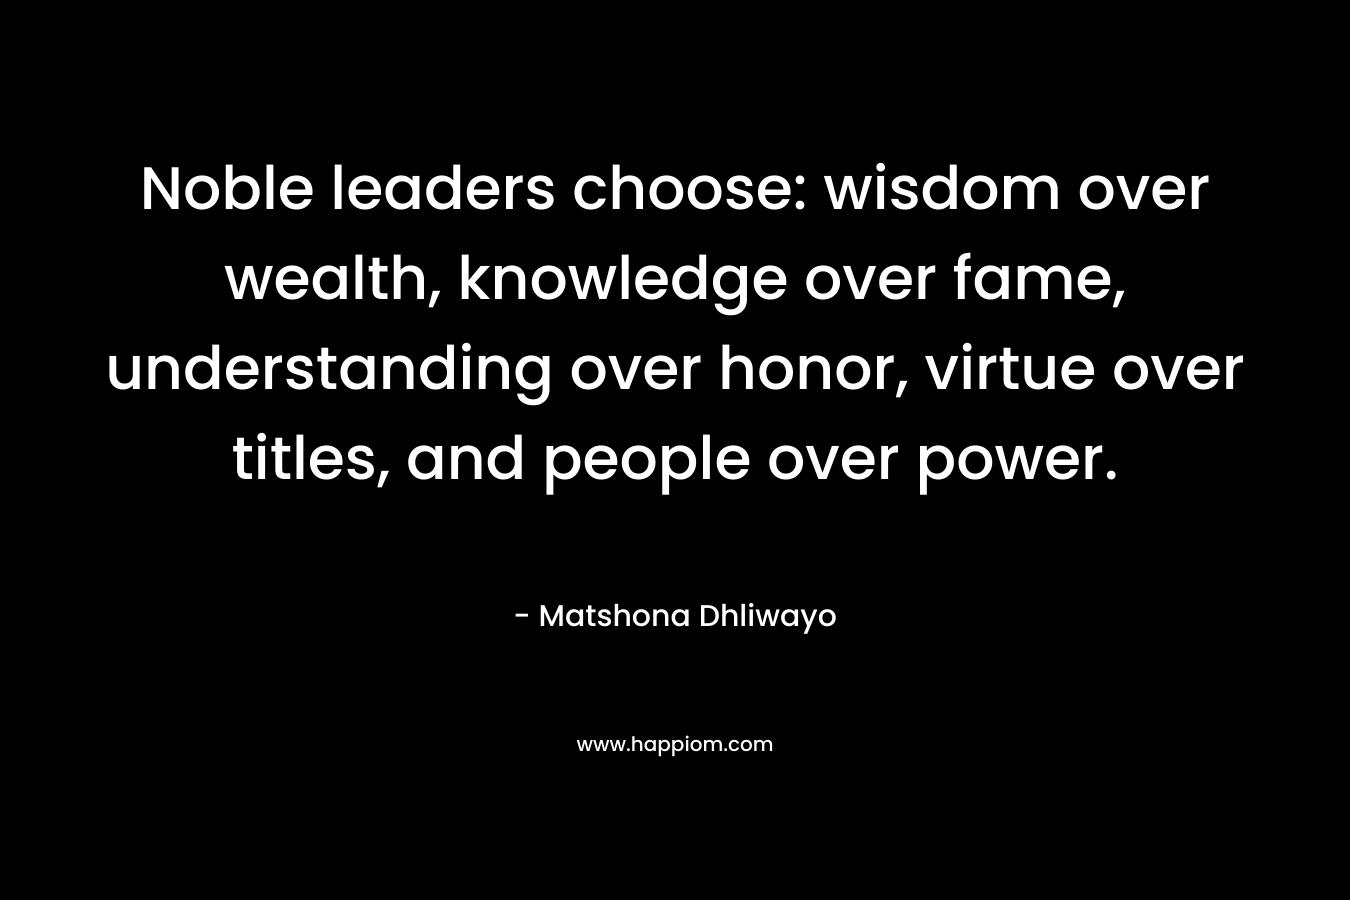 Noble leaders choose: wisdom over wealth, knowledge over fame, understanding over honor, virtue over titles, and people over power.